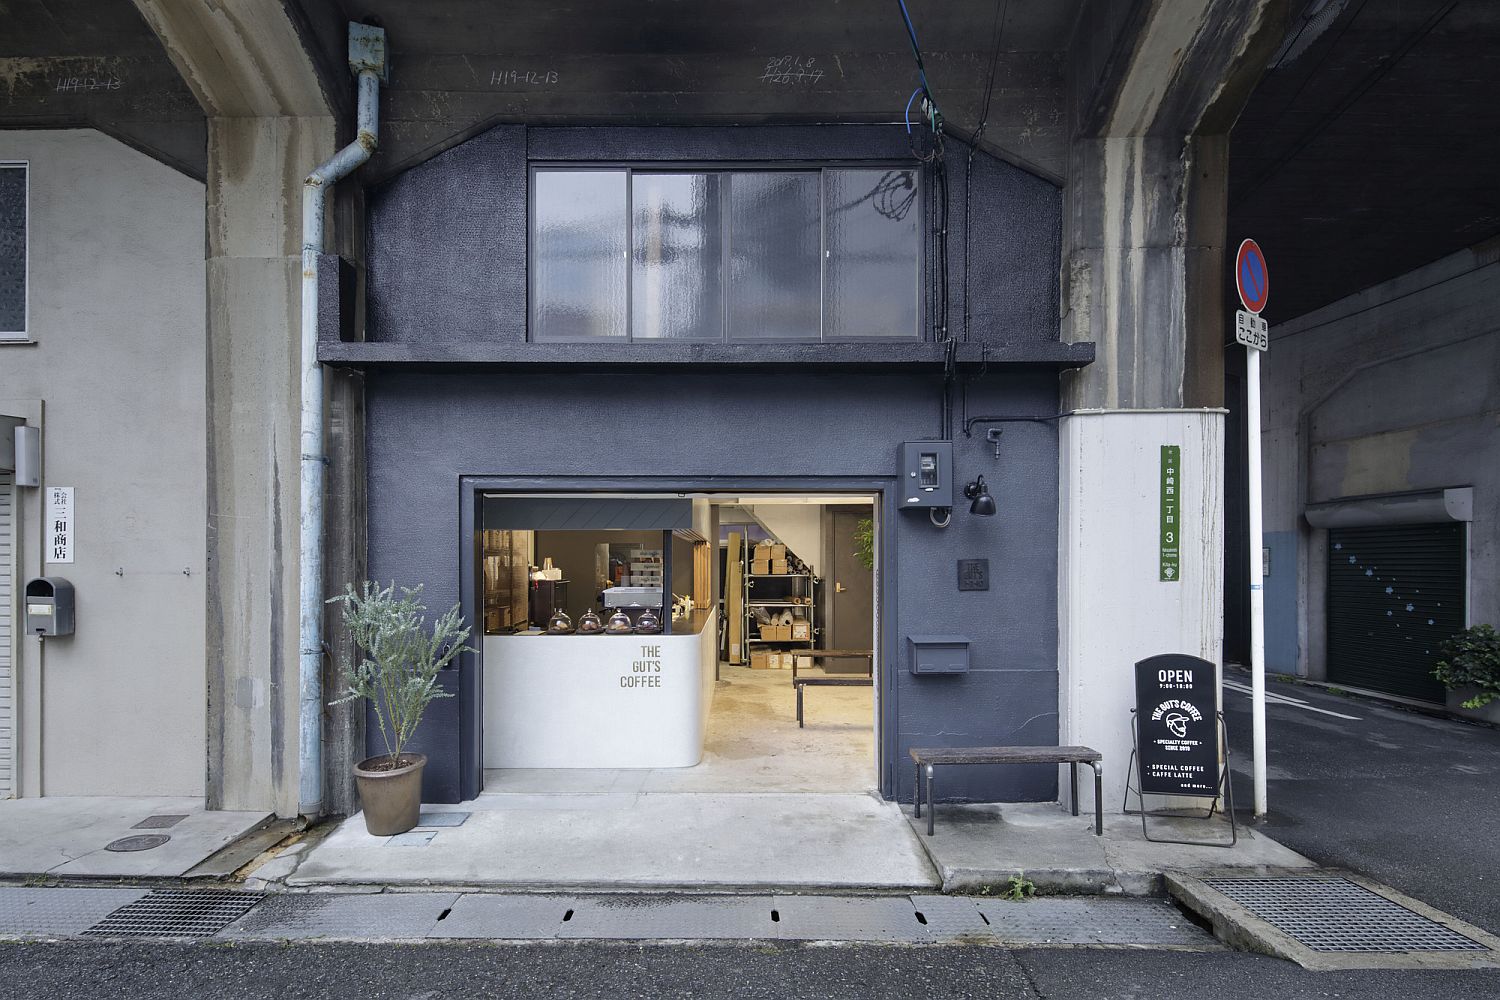 This Beautiful Japanese Coffee Shop Sits Inside a Revamped Industrial Warehouse